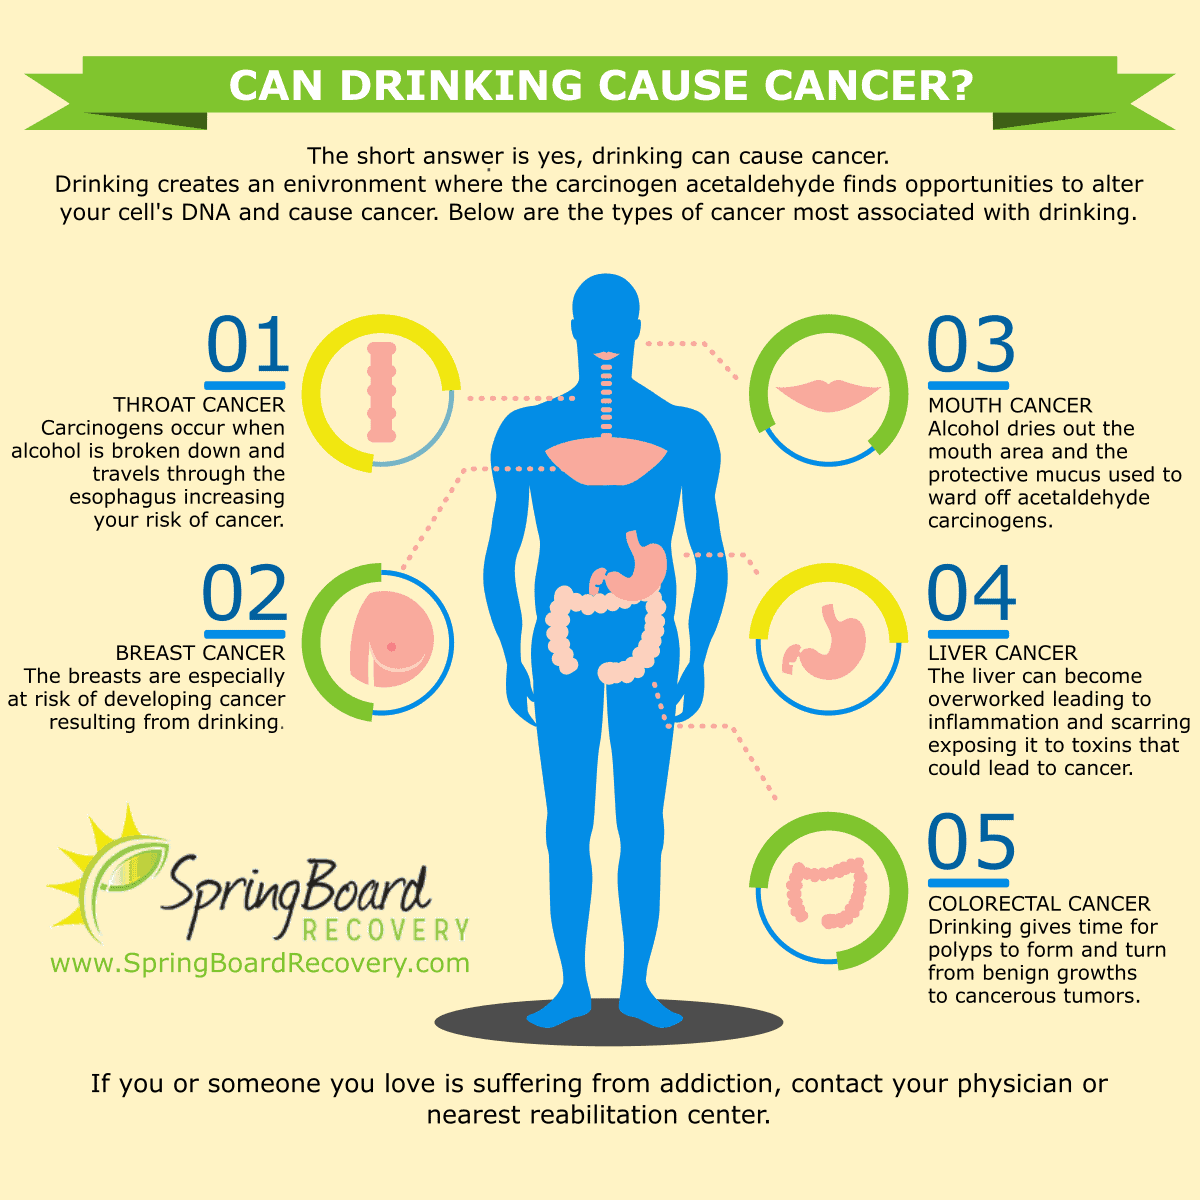 Does Drinking Cause Cancer?